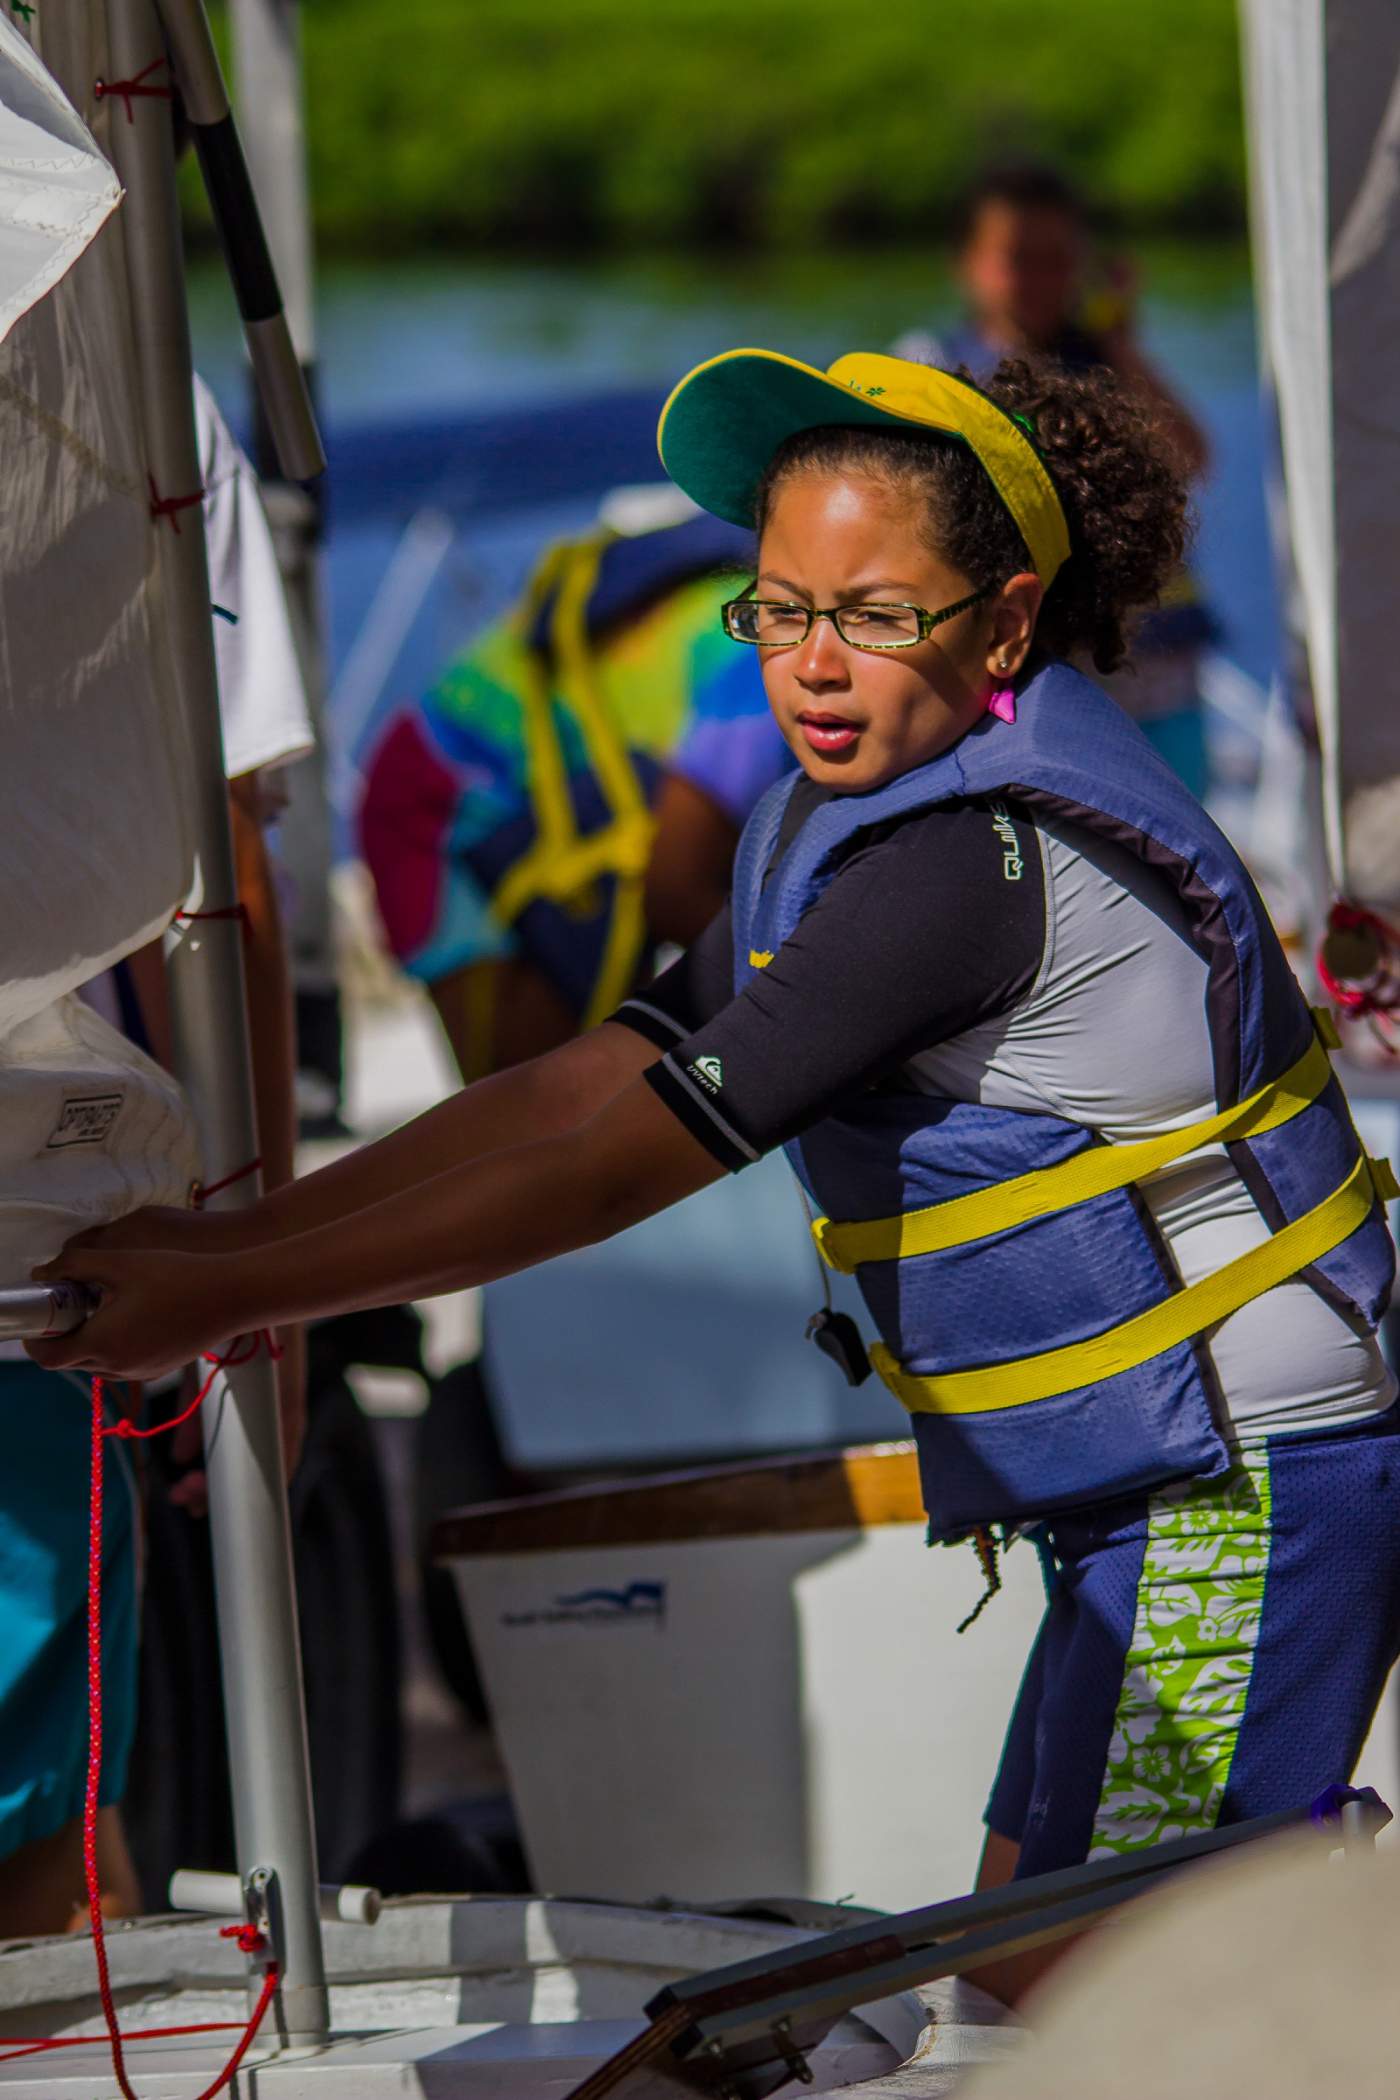 Youth Sailor working on her boat